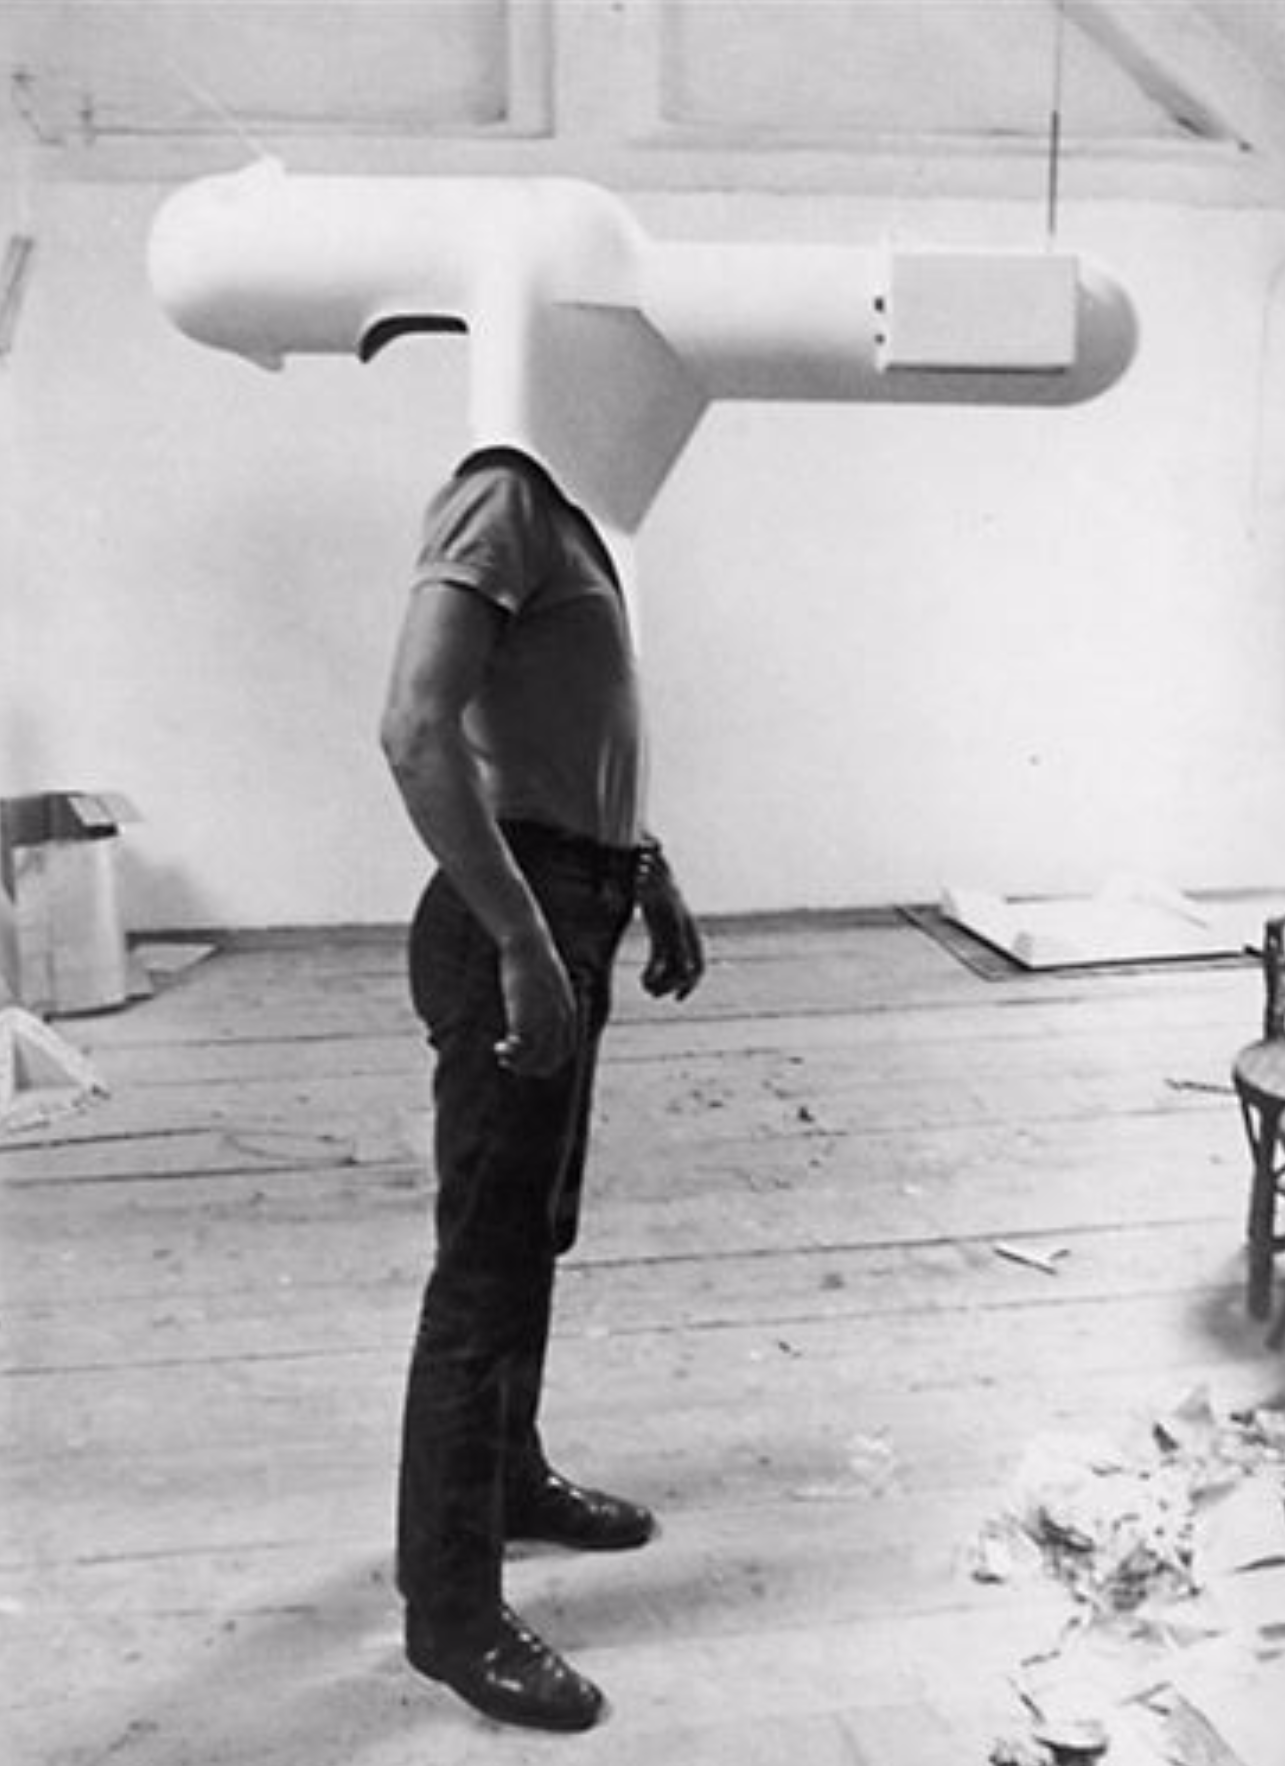 A portable TV concept created in 1967.